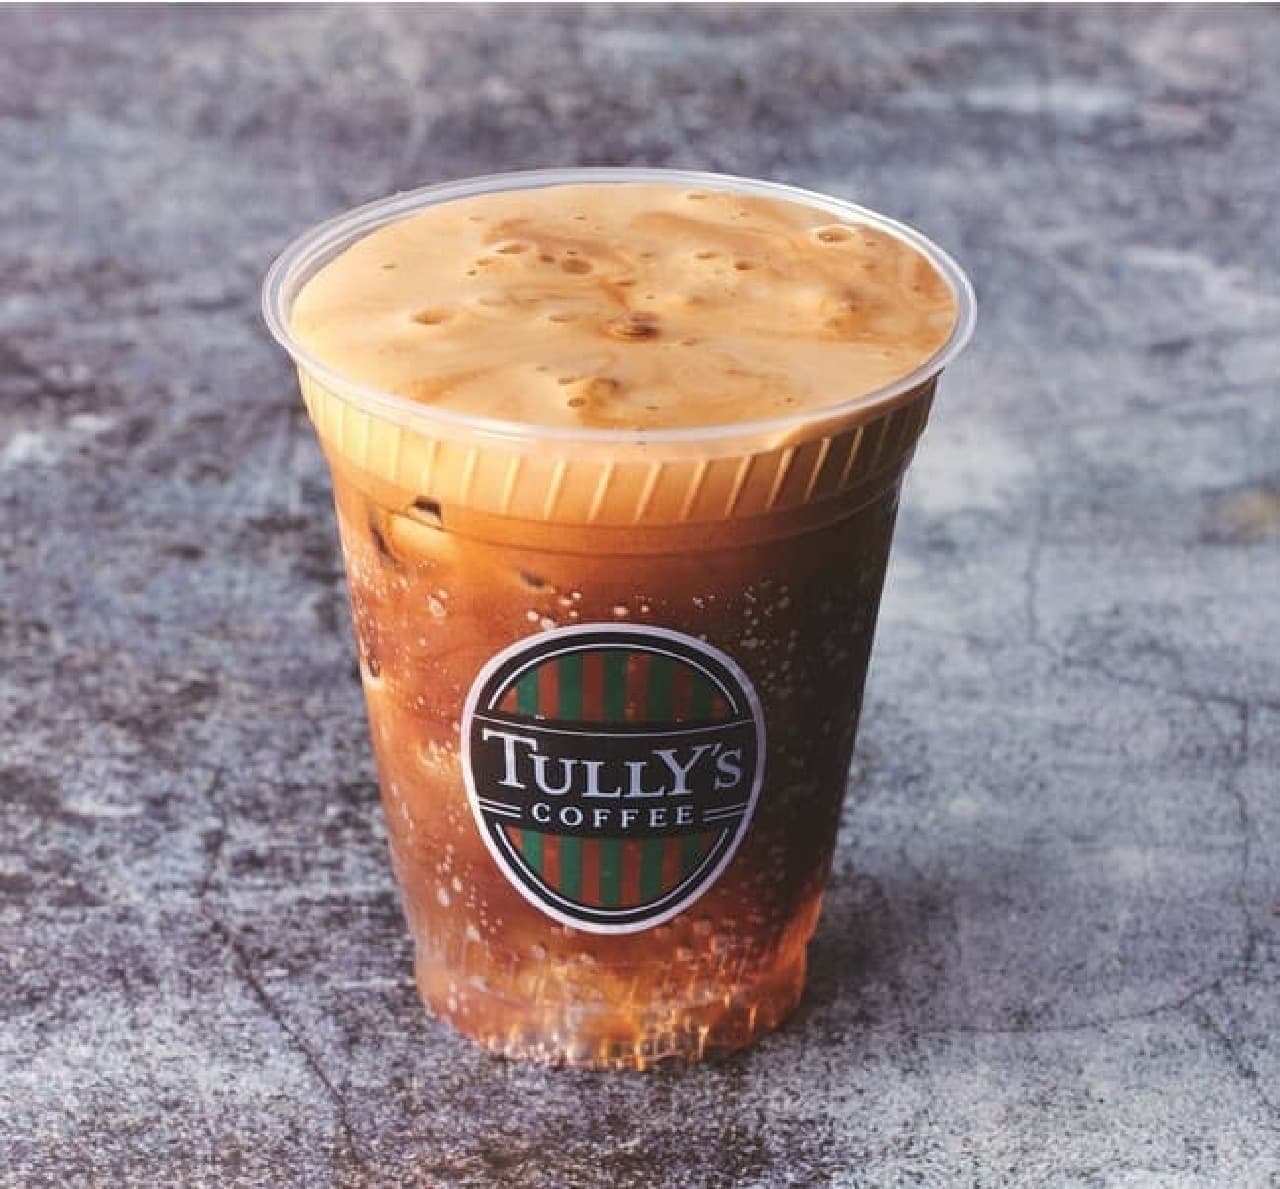 Tully's Coffee "Peach Yogurt Sour Cream" with Japanese white peaches! & TEA Grapefruit Separate Tea" also perfect for early summer!